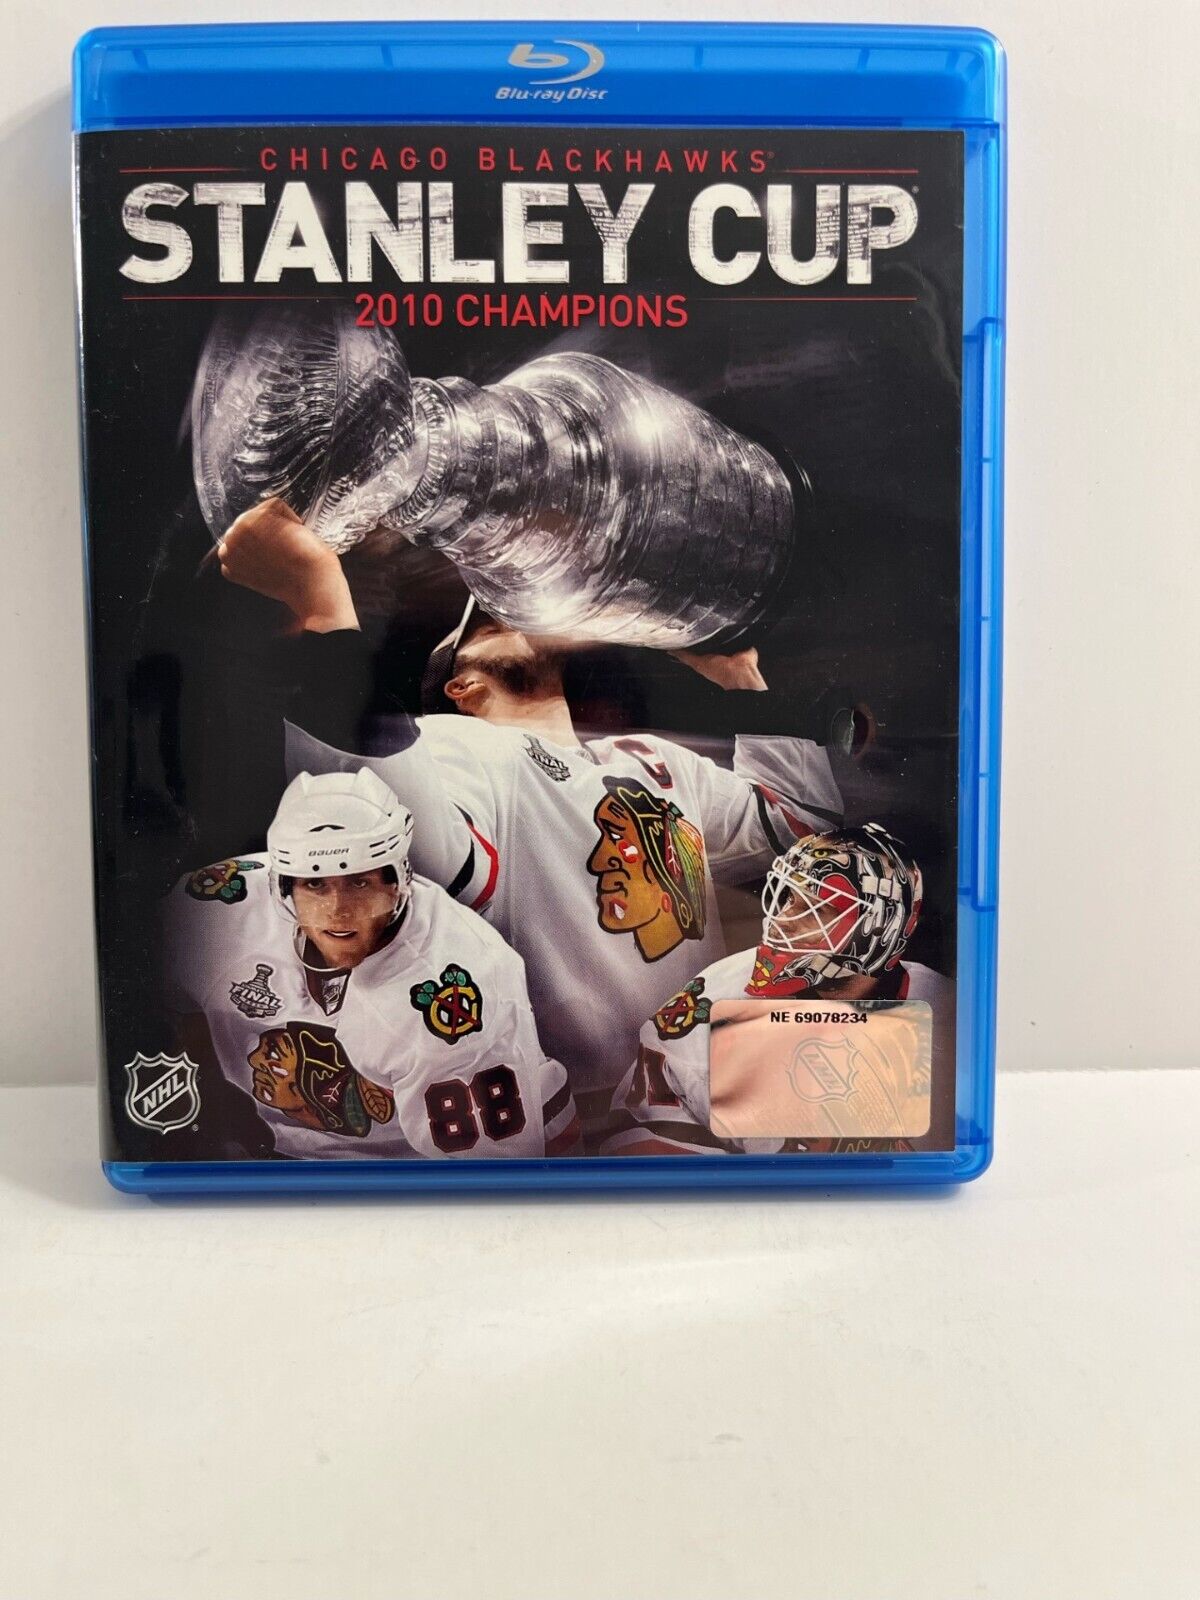 NHL: Stanley Cup 2009-2010 Champions - Chicago Blackhawks (Blu-ray Disc, 2010)